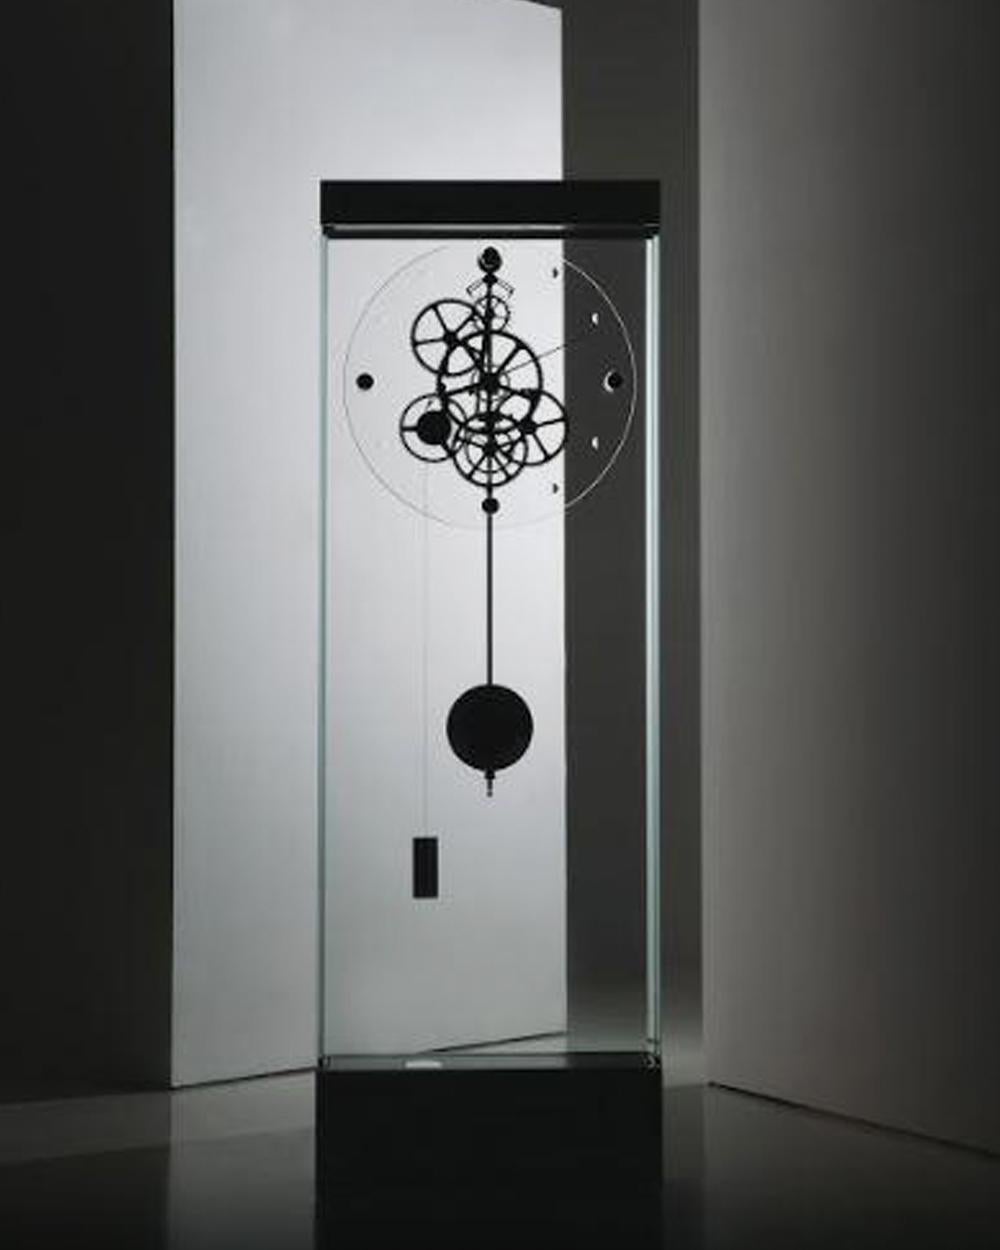 Adagio floor pendulum clock designed by Gianfranco Barban for Teckell is a part of Takto timepieces collection. The clear crystal glass structure of this elegant timepiece allows you to see the beautiful Graham escapement mechanism inside. The